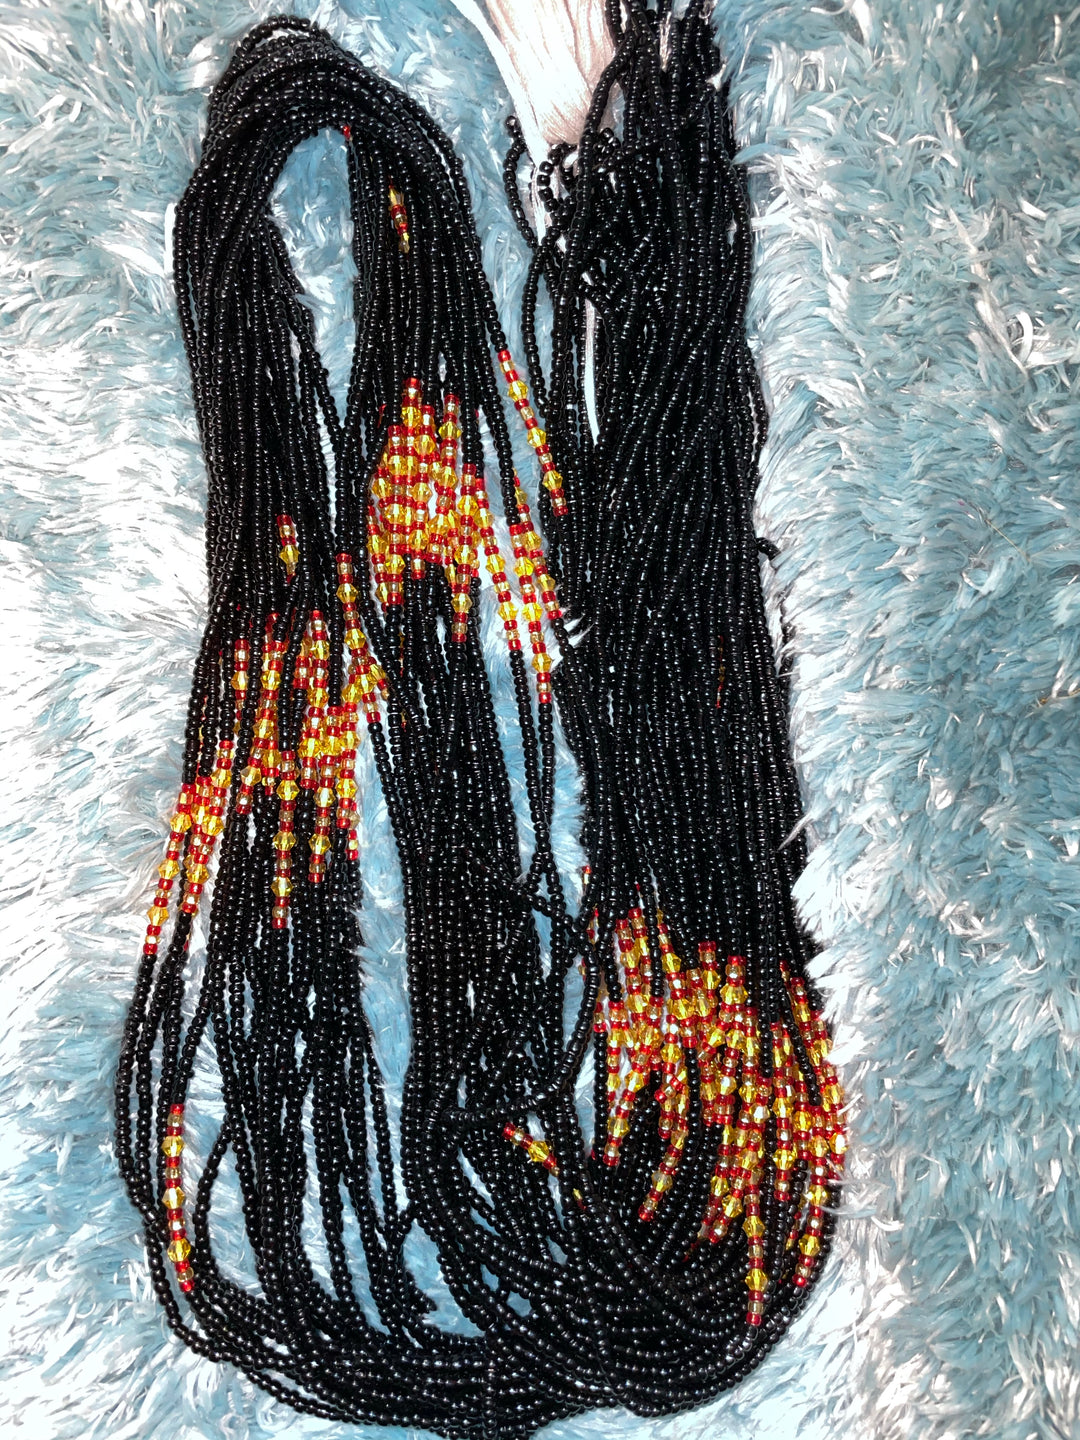 Waist beads. This is very long